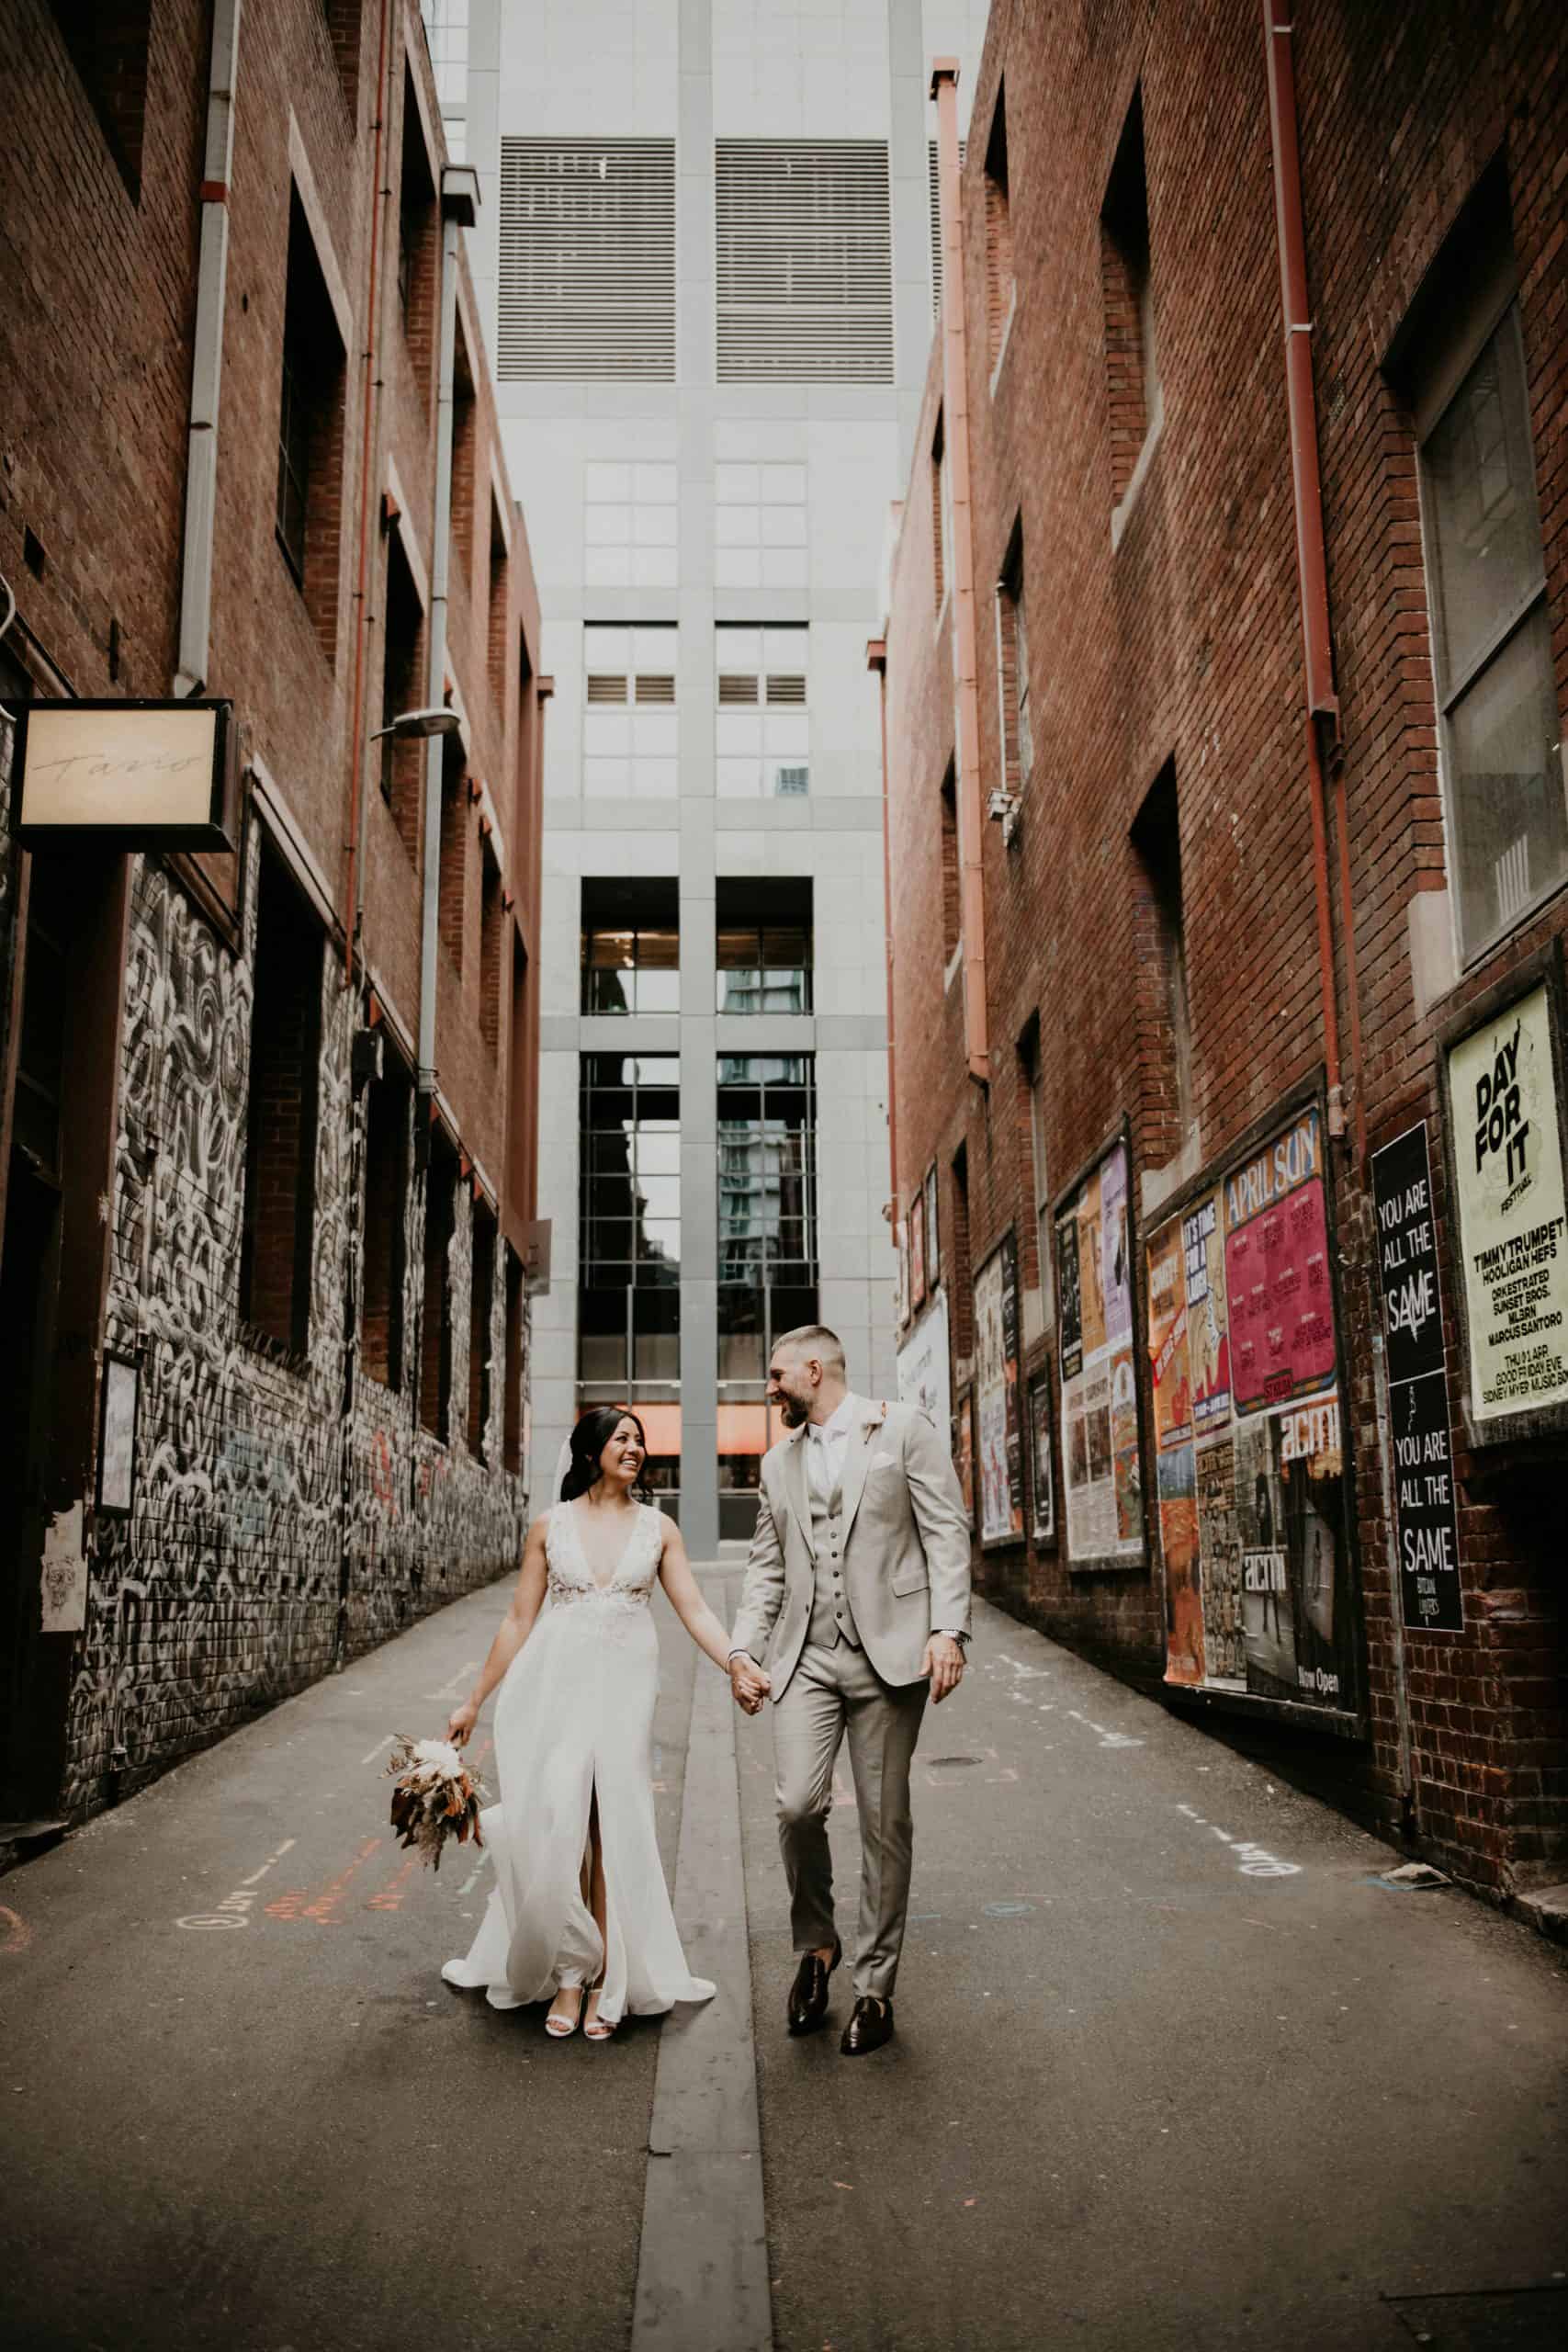 Couple Walks down ACDC Lane how to elope Intimate Wedding Melbourne Lets Elope Melbourne Celebrant Photographer Elopement Package Victoria Sarah Matler Photography Fitzroy Gardens Melbourne Laneways weddings intimate